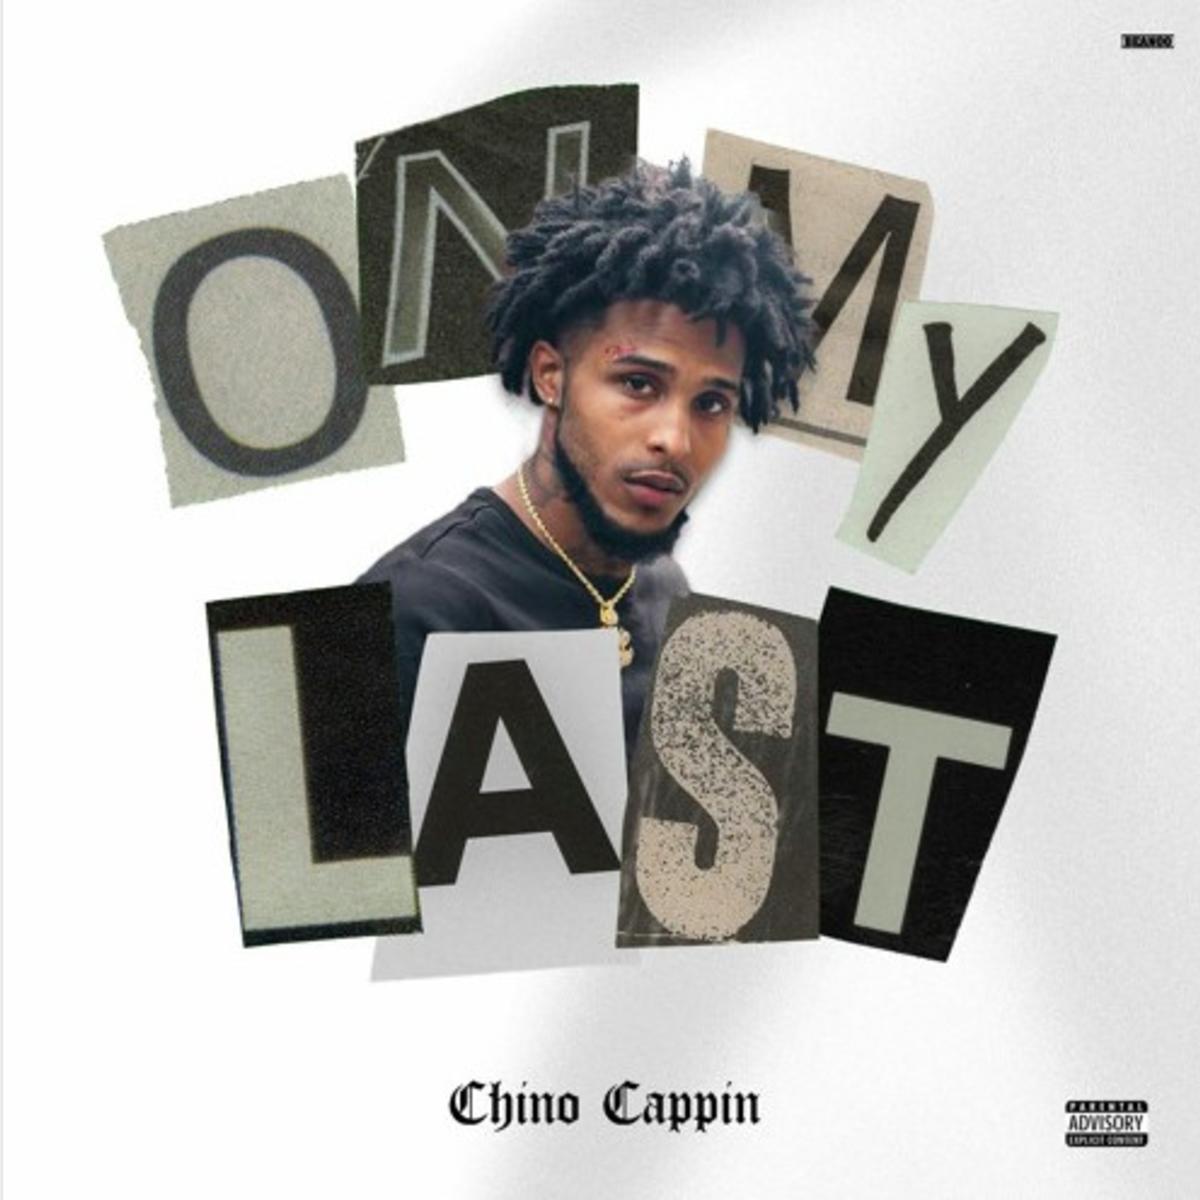 Chino Cappin – “On my Own” [Audio]